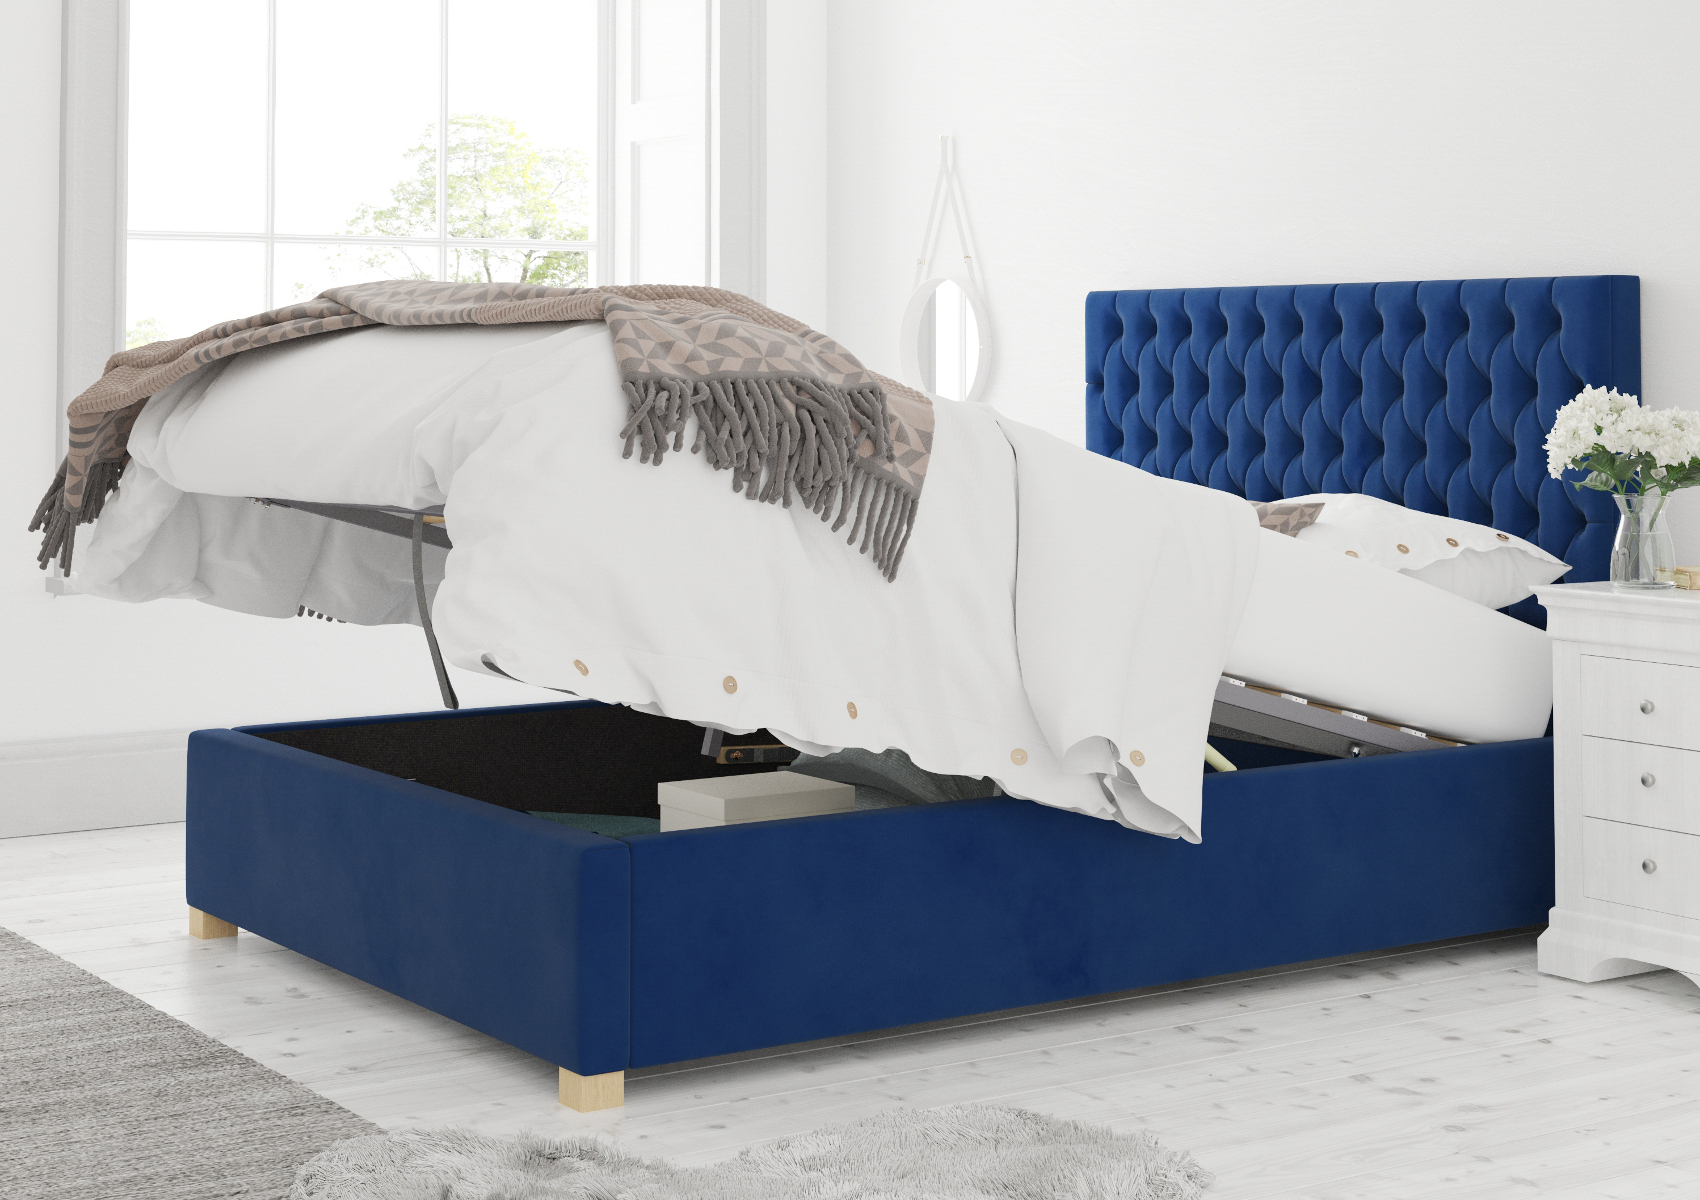 View Malton Navy Upholstered Double Ottoman Bed Time4Sleep information